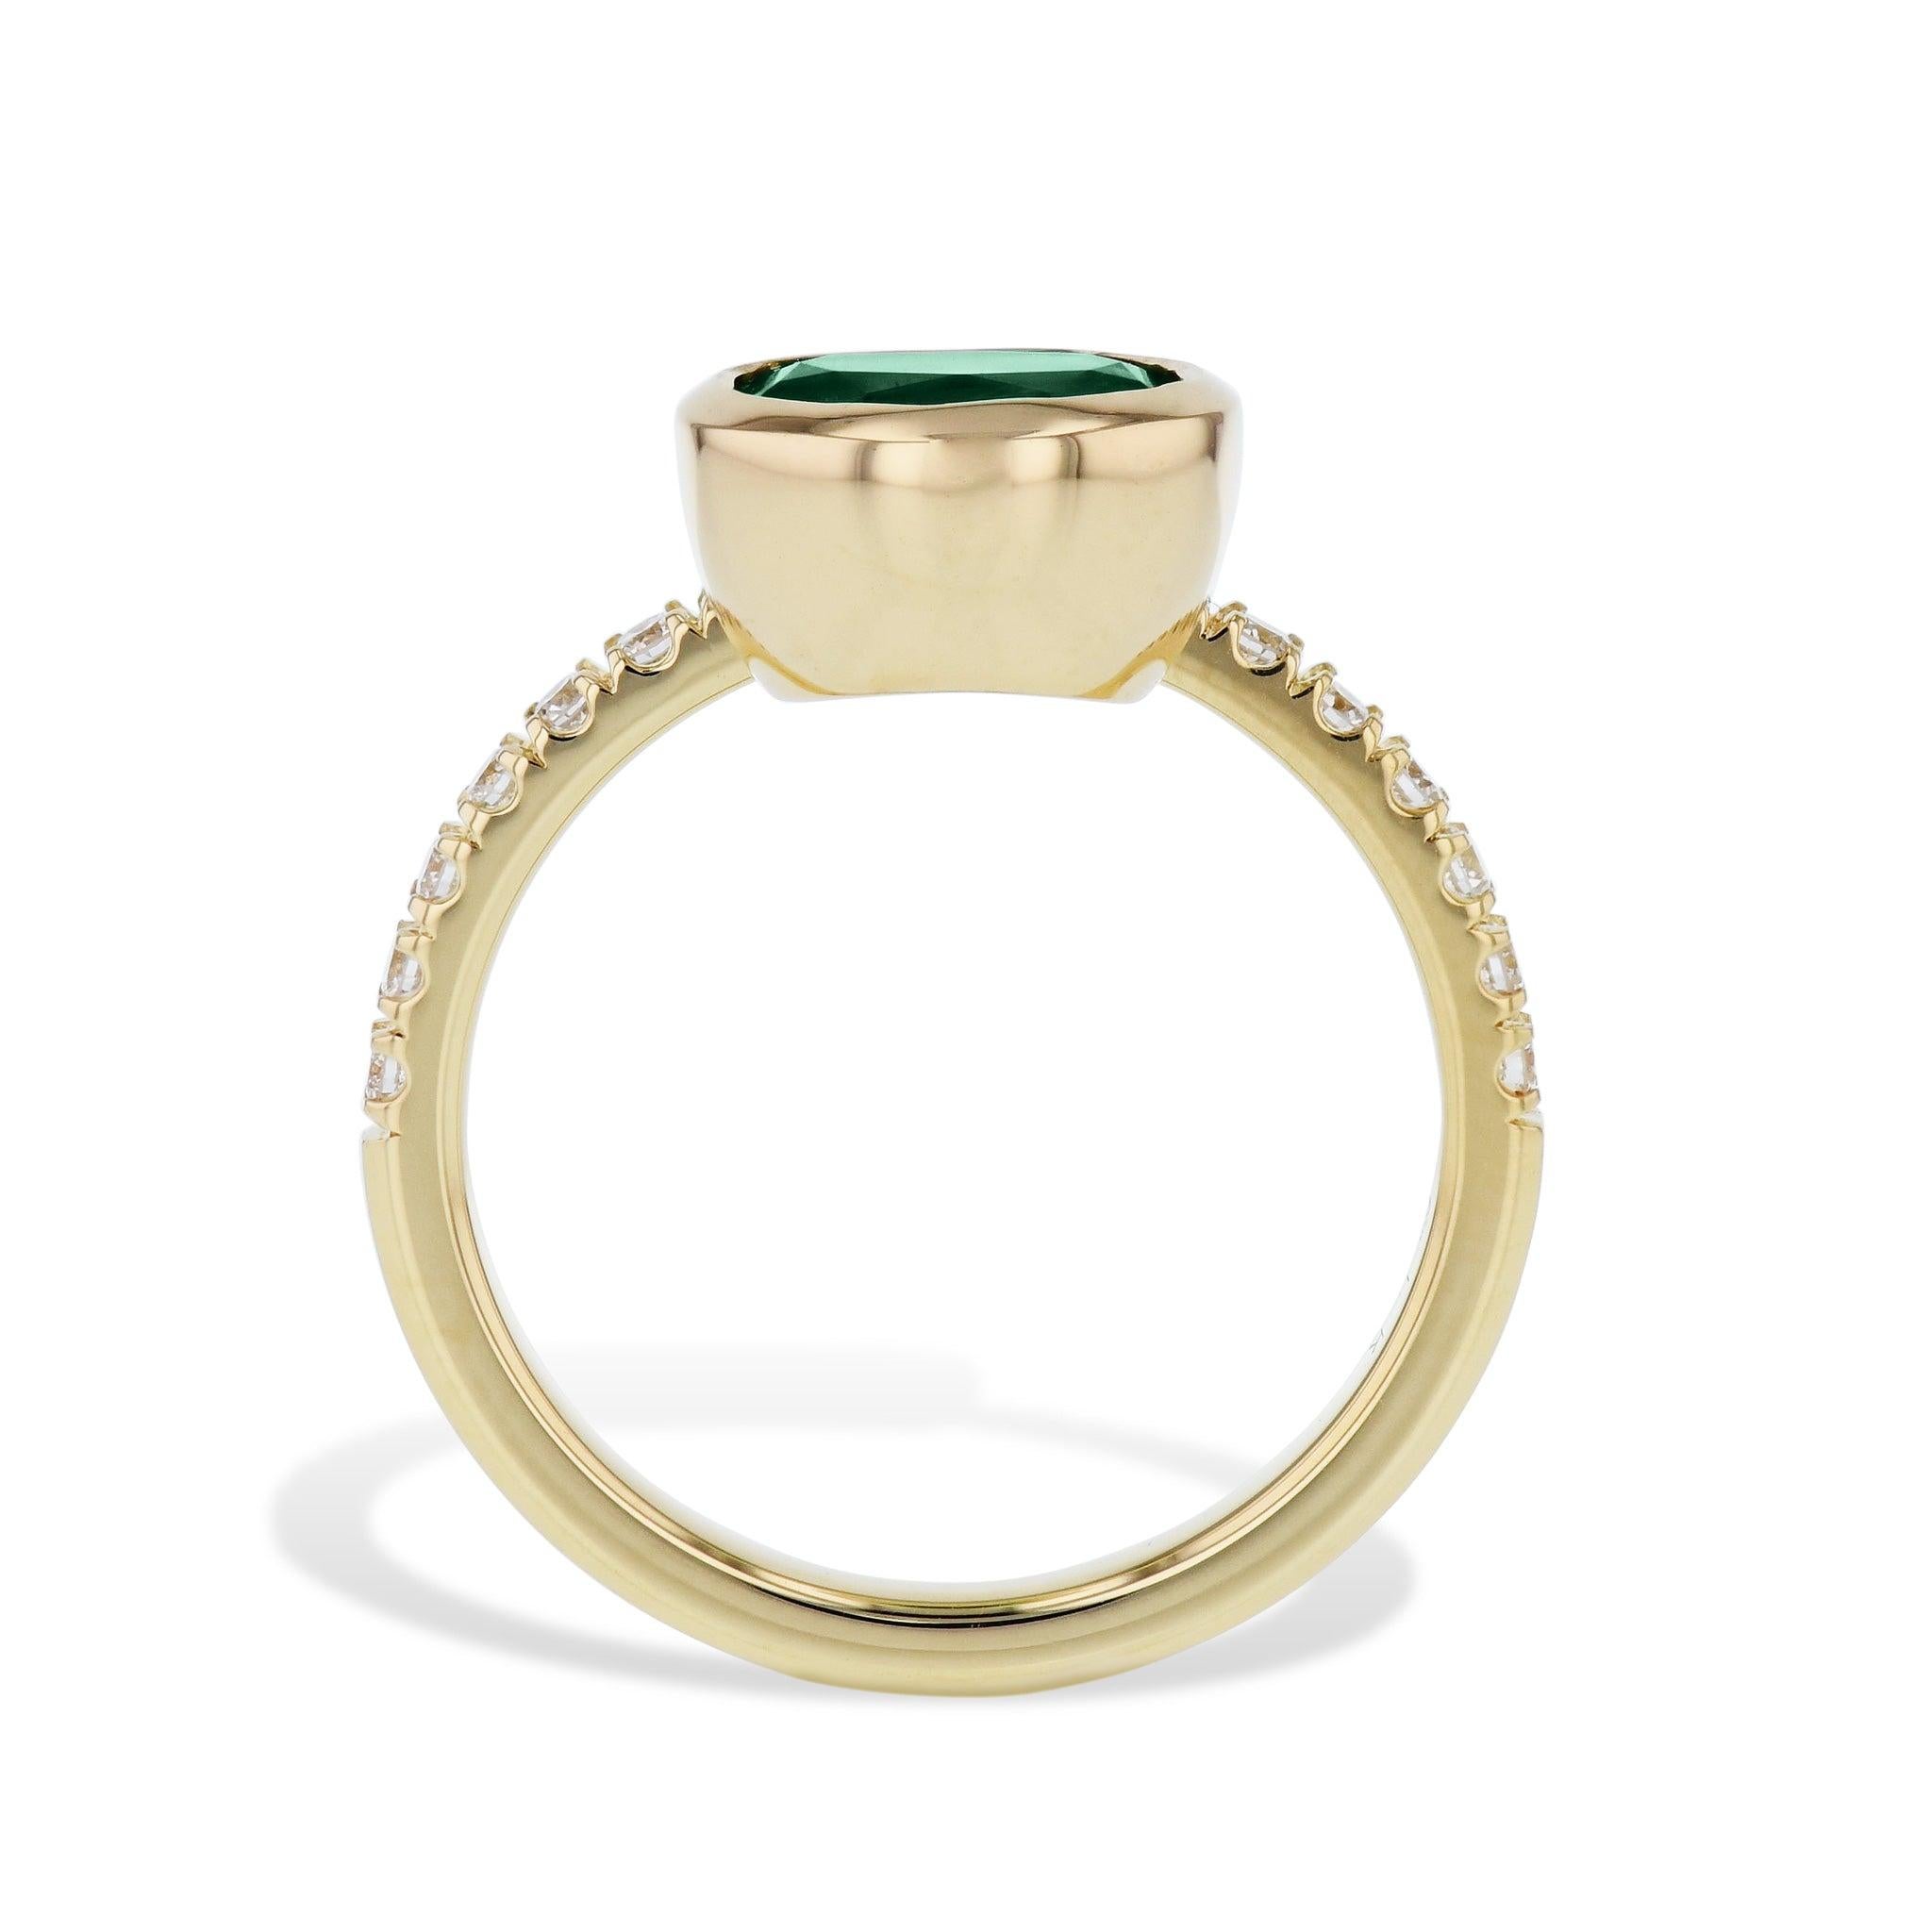 Be enthralled by this captivating 18kt Yellow Gold Oval Zambian Emerald and Pave Diamond Ring. Adorning the bezel set Oval Cut Zambian Emerald is diamond band. Handcrafted to perfection, this exquisite size 6.75 piece is sure to become a treasured